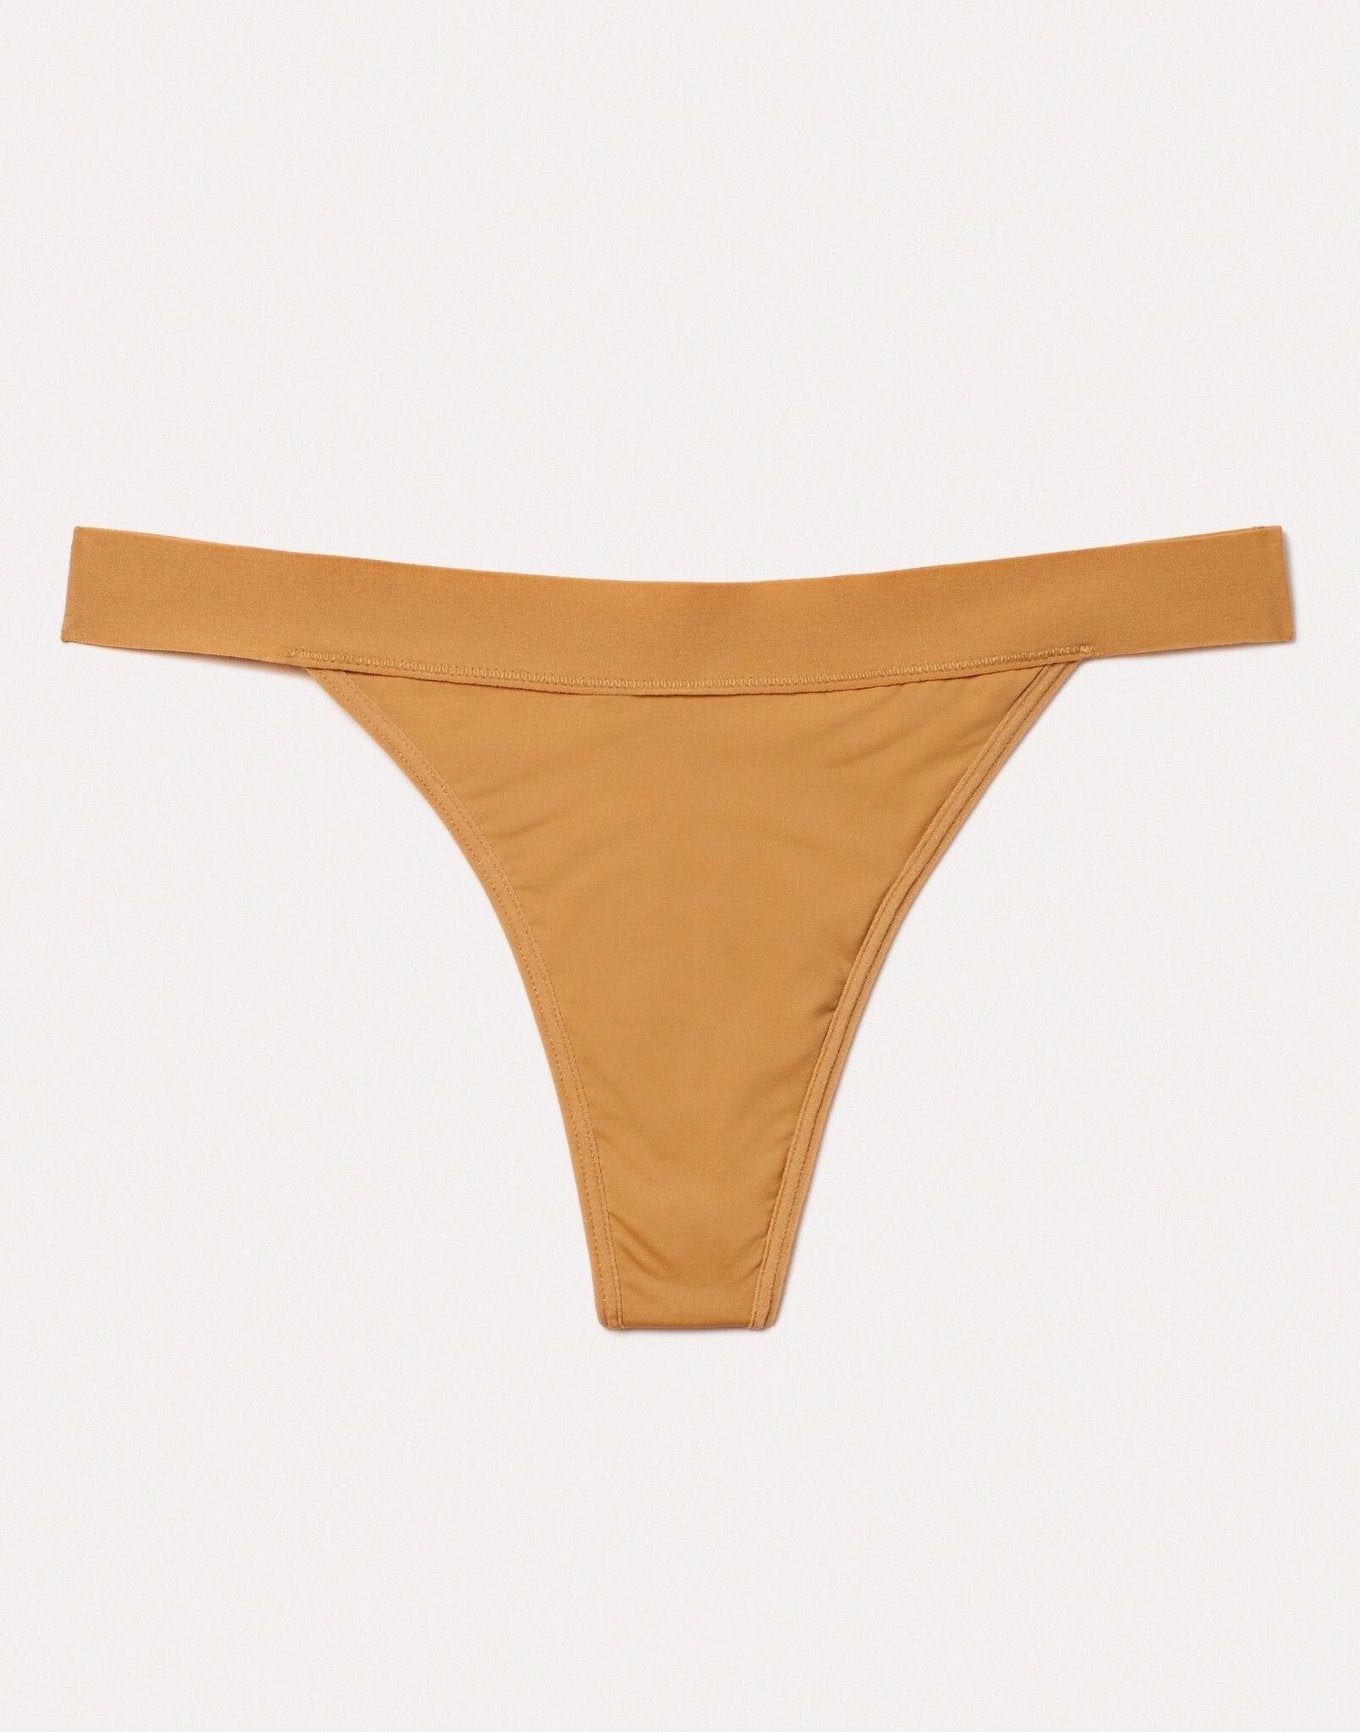 Joyja Leah period-proof panty in color Sand Dry and shape thong